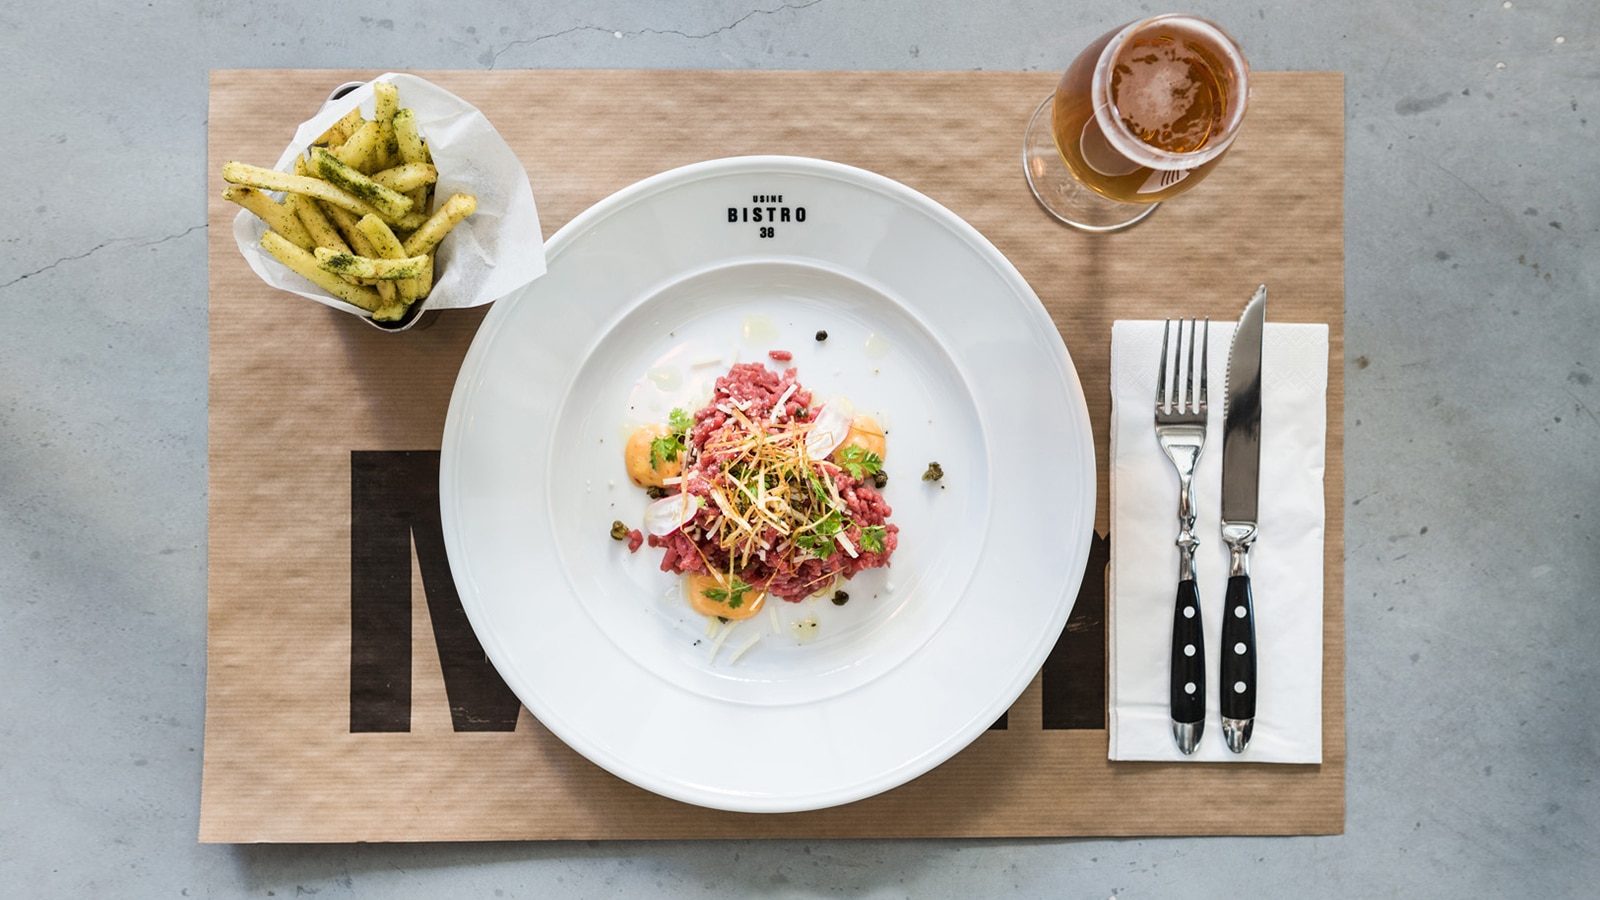 The Best New Places To Eat And Drink | The Journal | MR PORTER